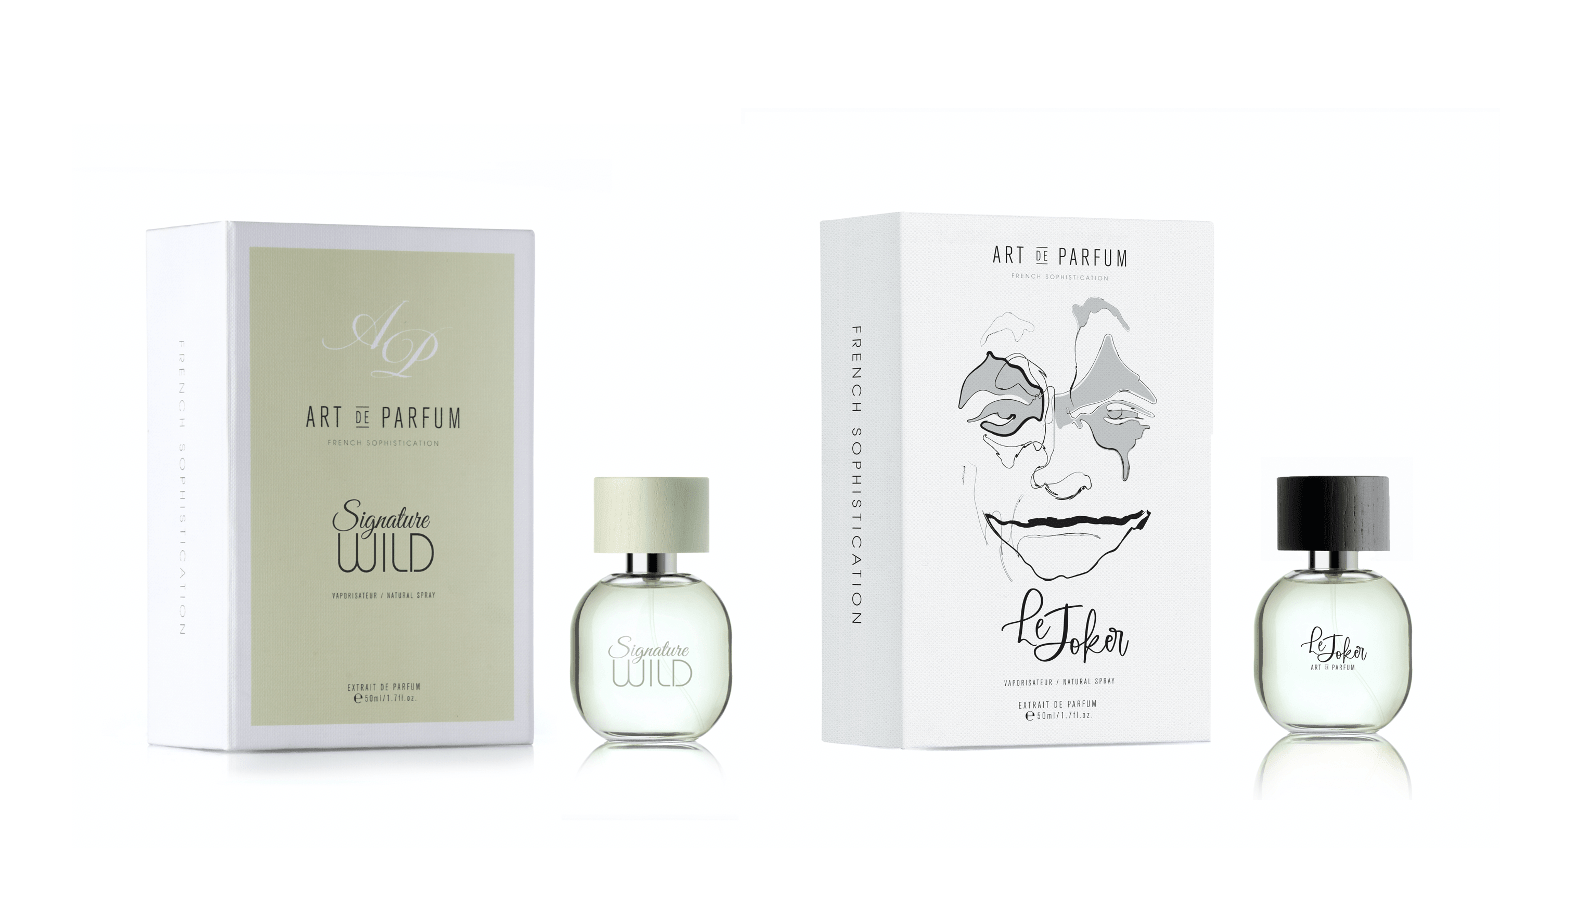 Art de Parfum, luxury and cruelty-free fragrances made in France